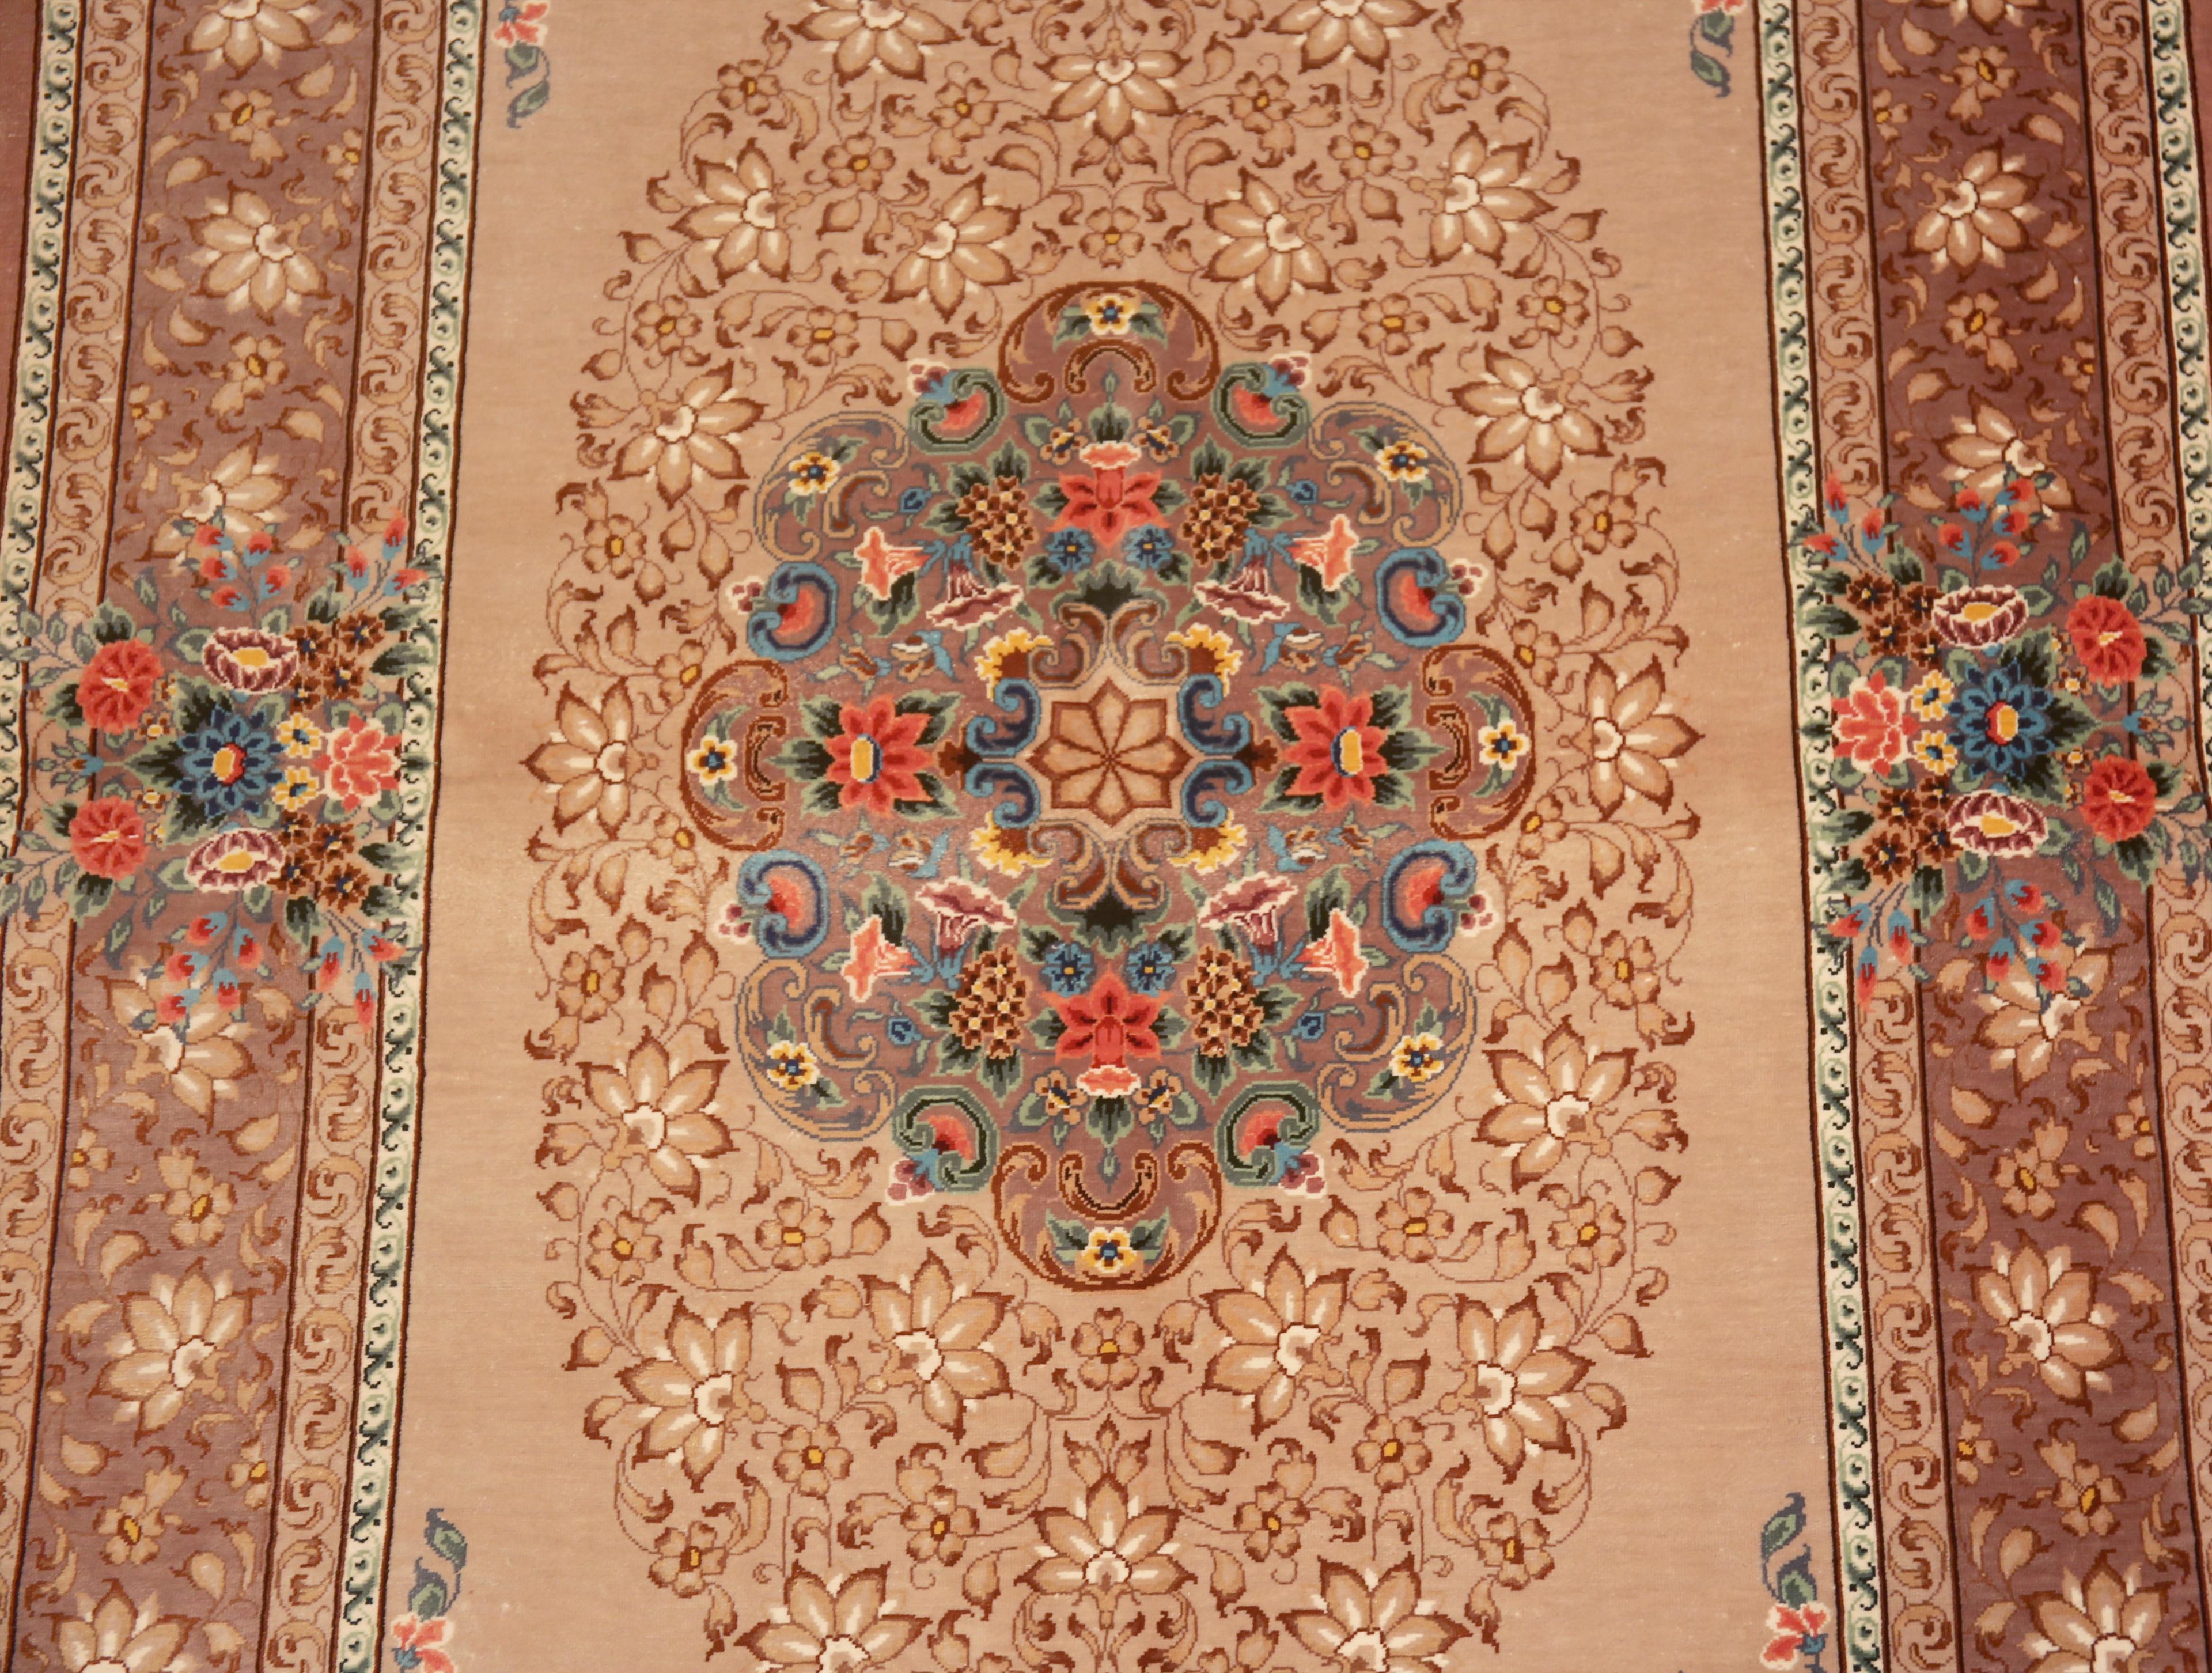 Hand-Knotted Luxurious Small Fine Floral Vintage Persian Silk Qum Rug 2'7